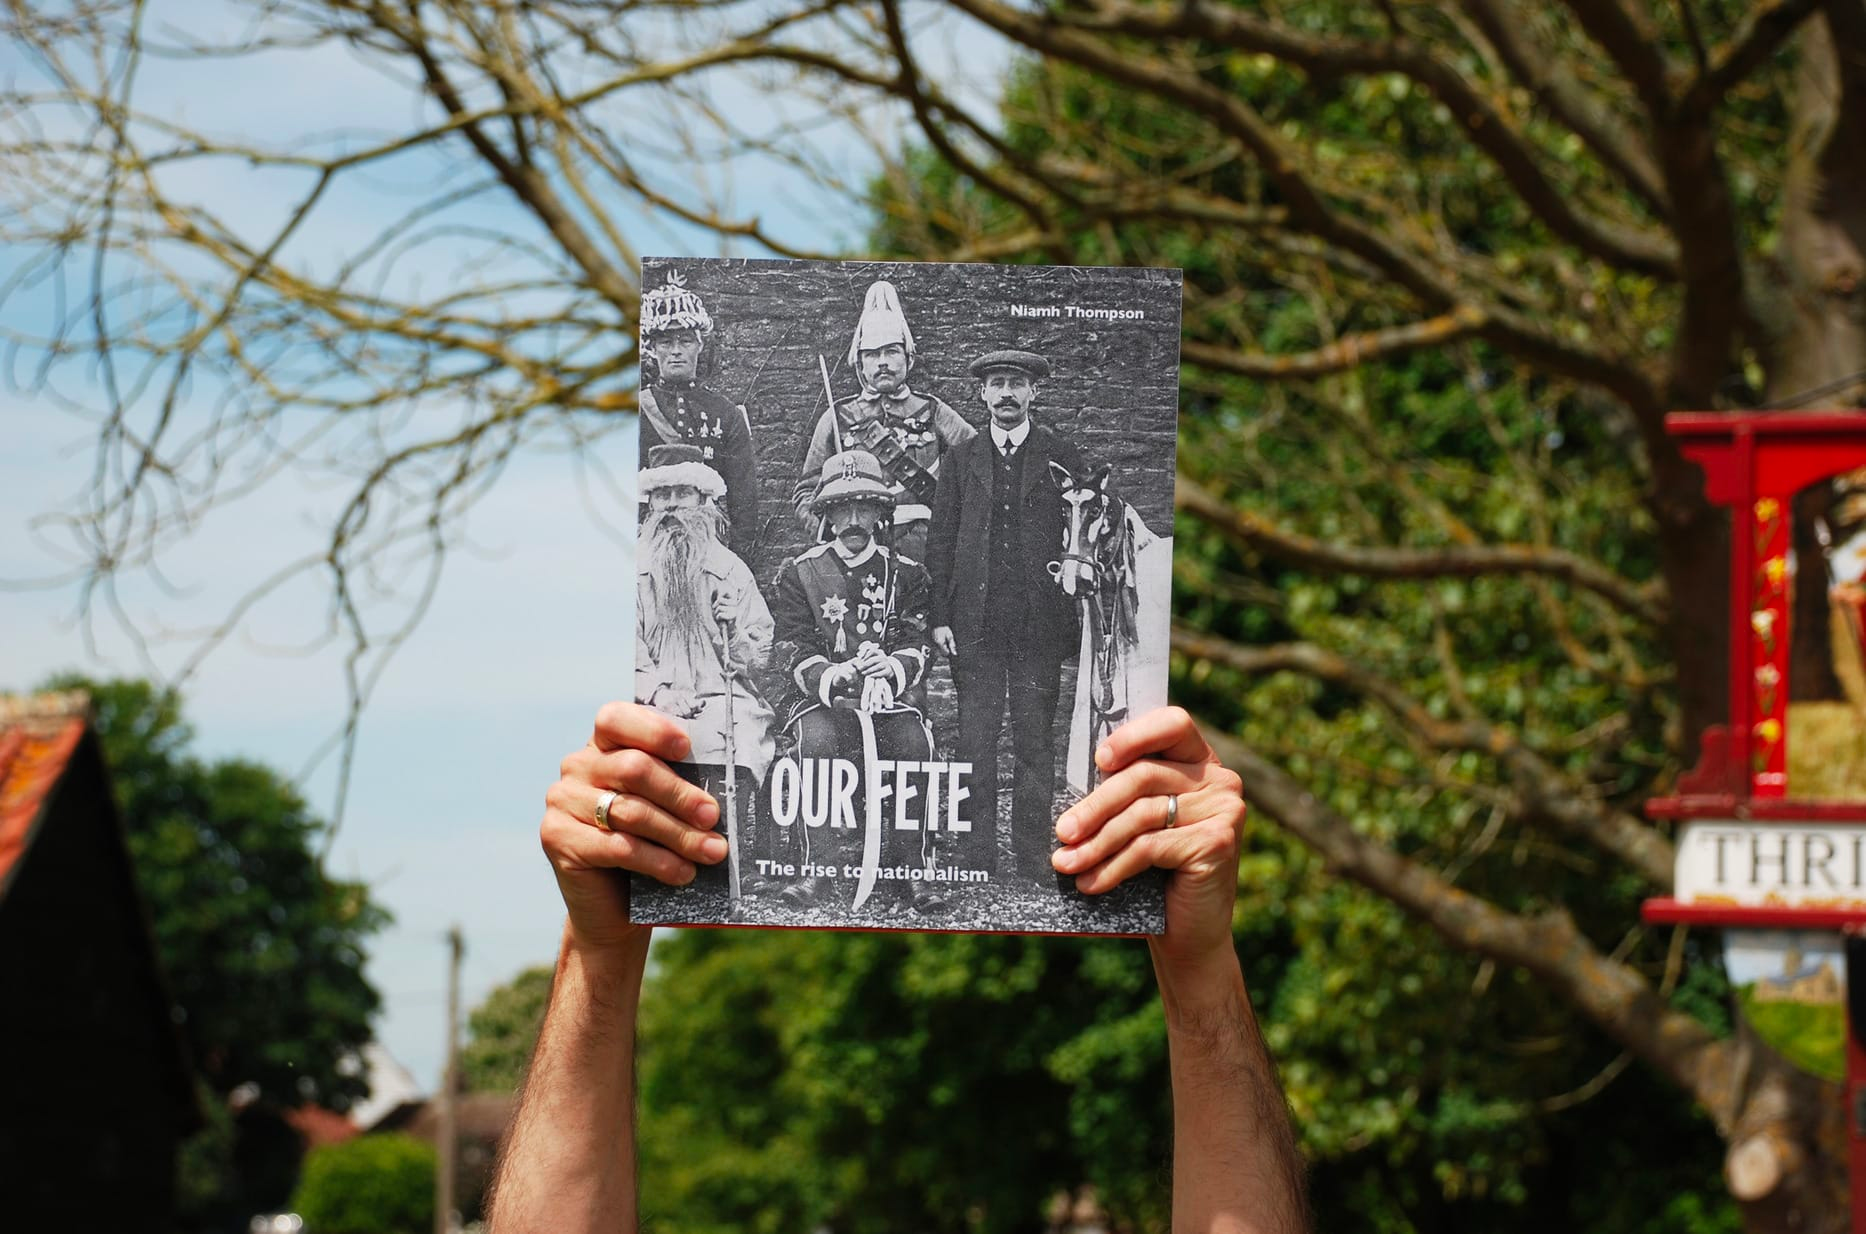 Photograph of a pair of hands, in an outdoor setting, holding up a book towards the camera, which has part of a black and white photographic group portrait on the cover, and the title ‘Our Fete’.